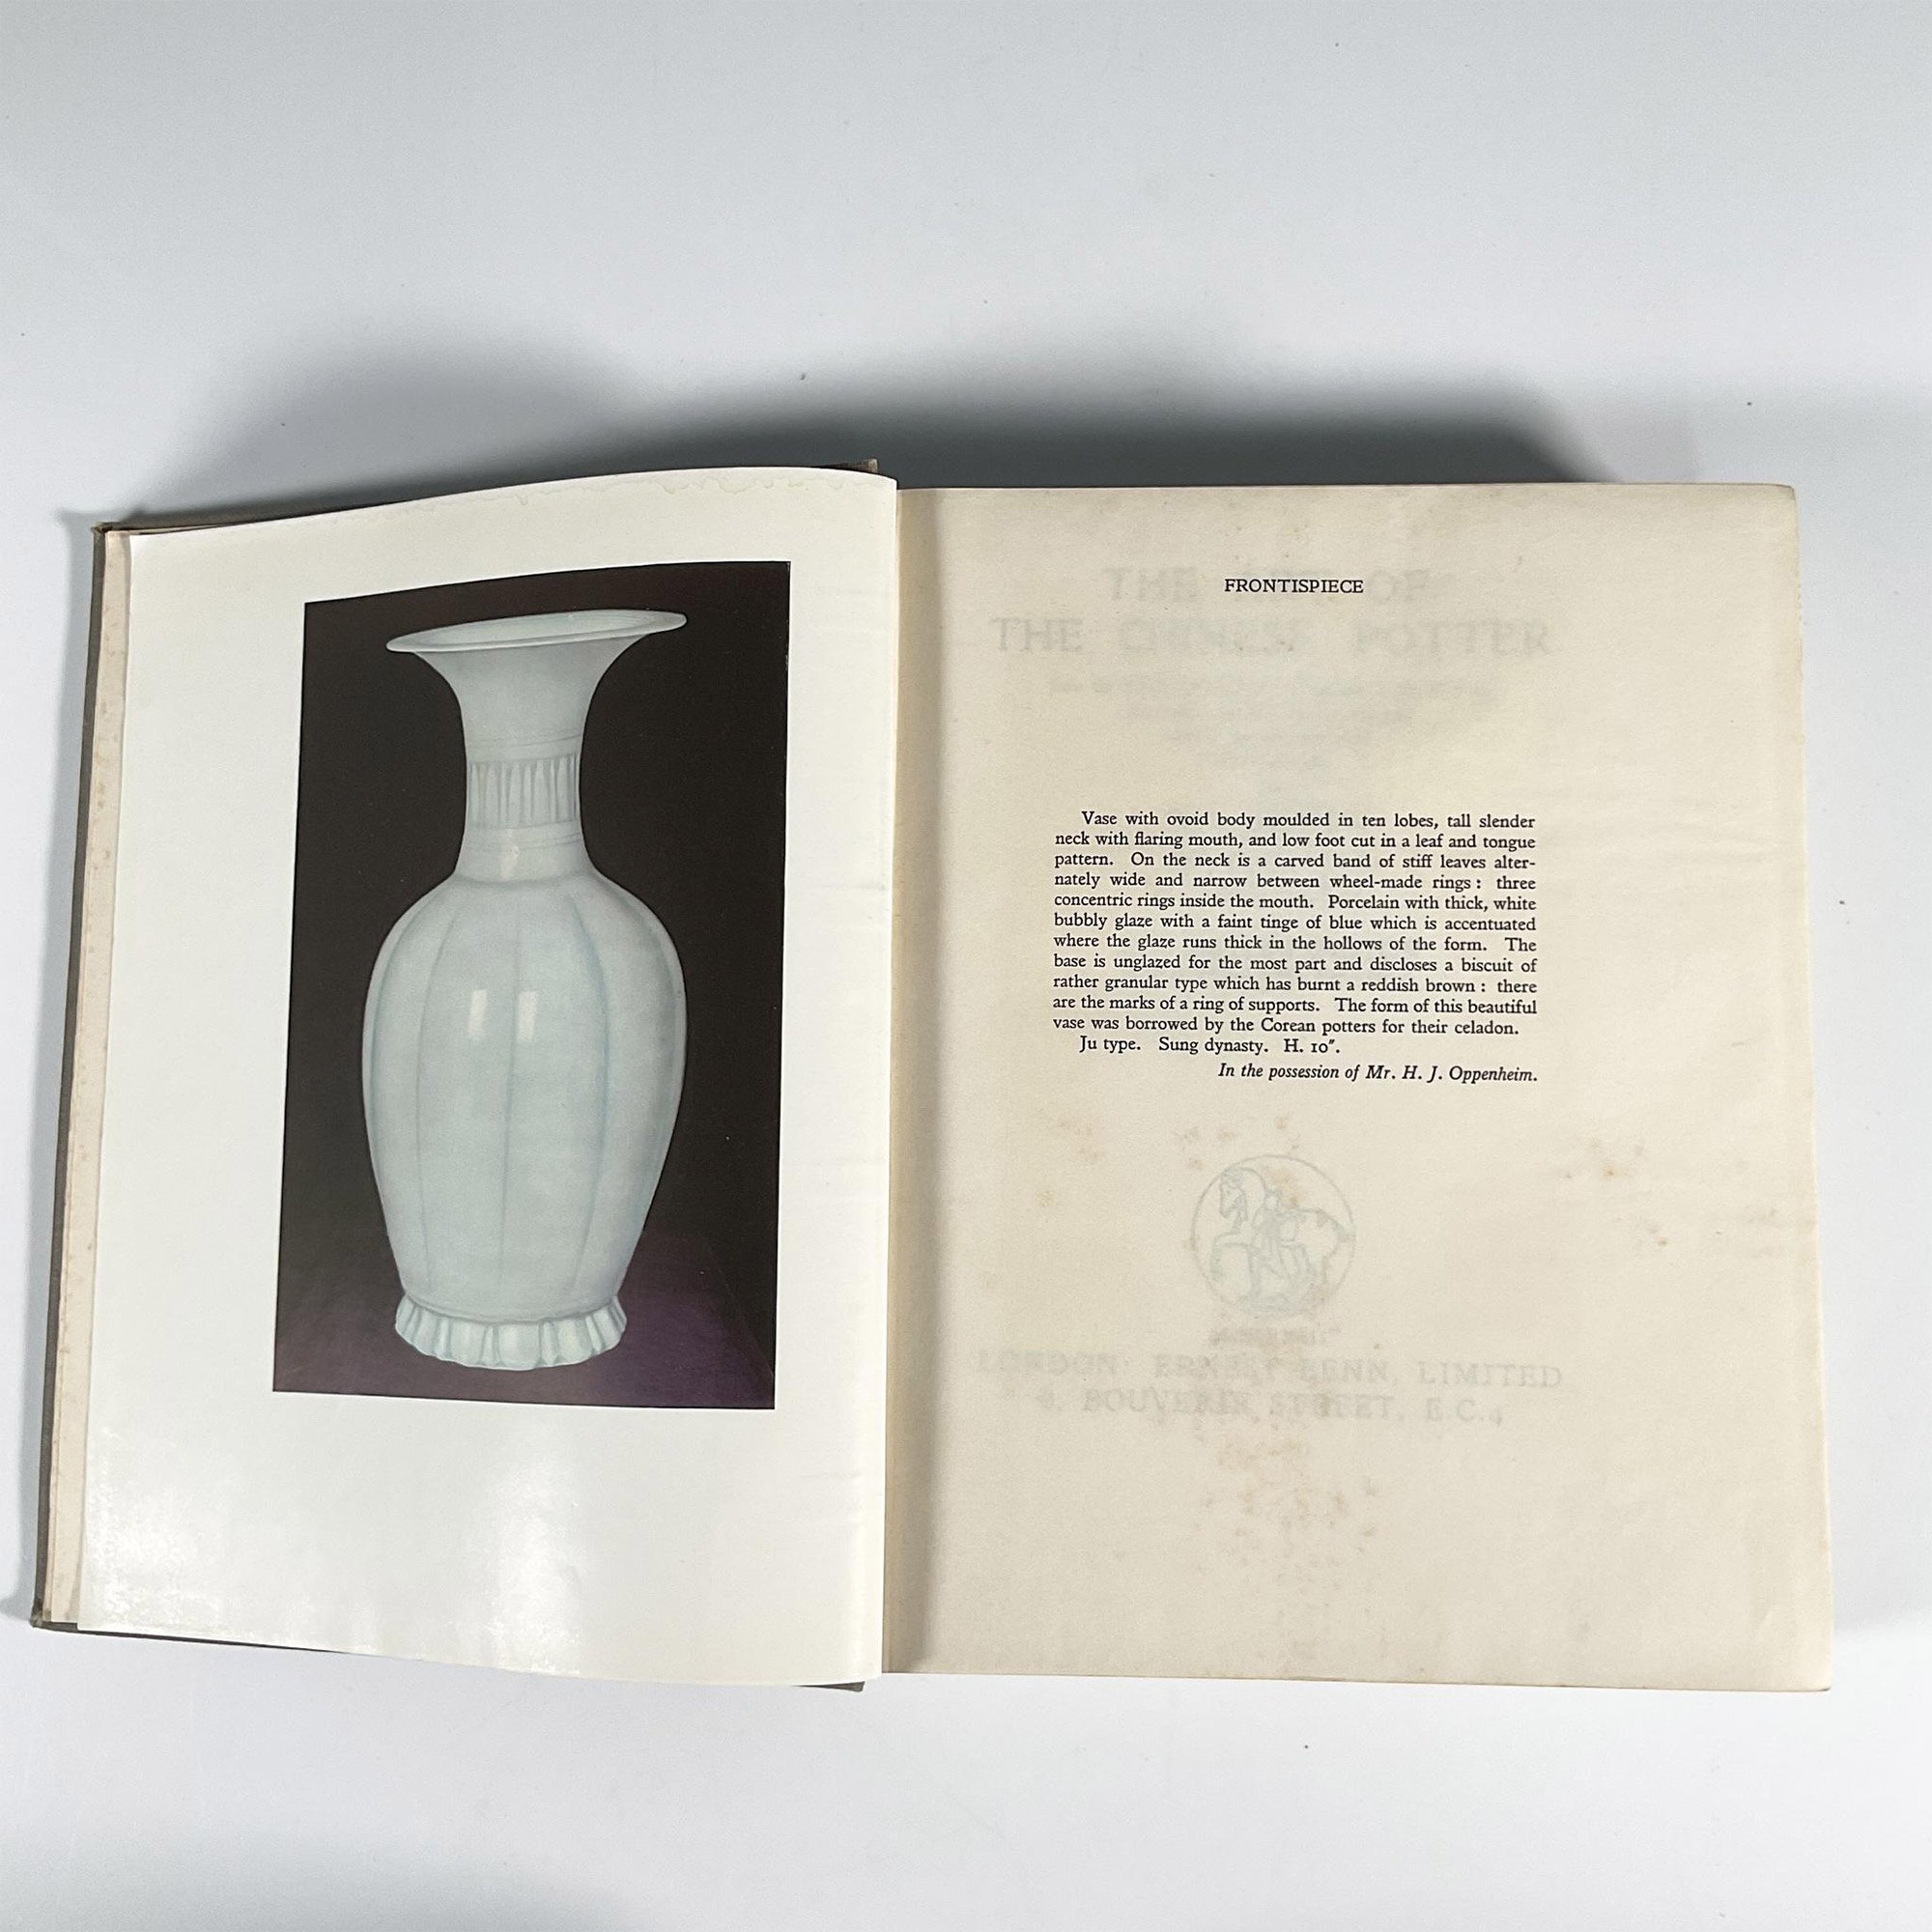 The Art of The Chinese Potter, Book by Hobson & Hetherington - Image 3 of 5